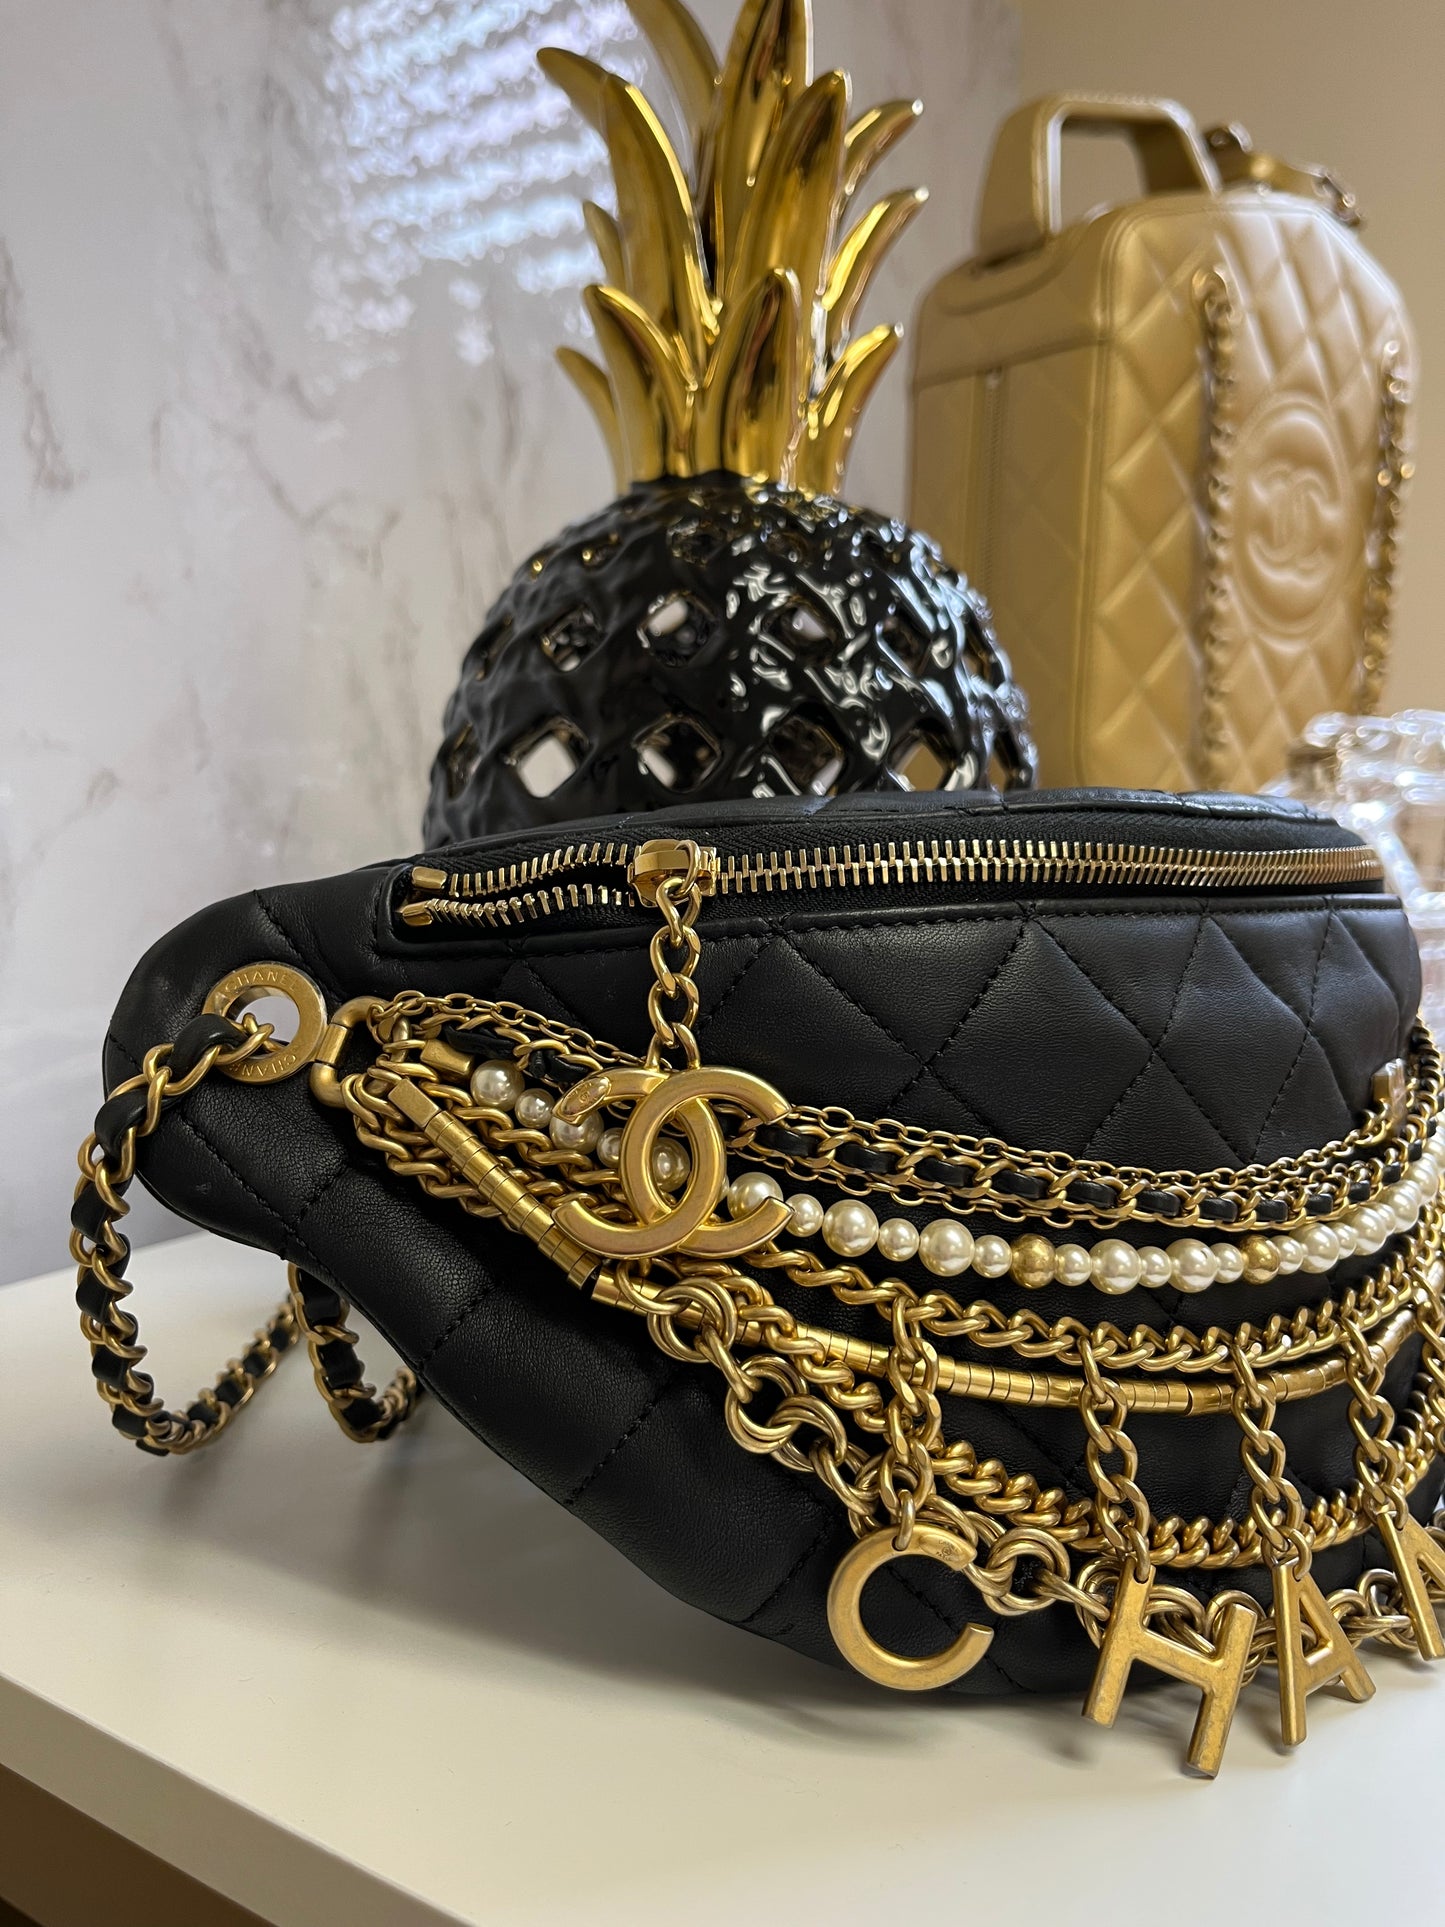 CHANEL Lambskin Quilted All About Chains Waist Belt Bag Black 384395